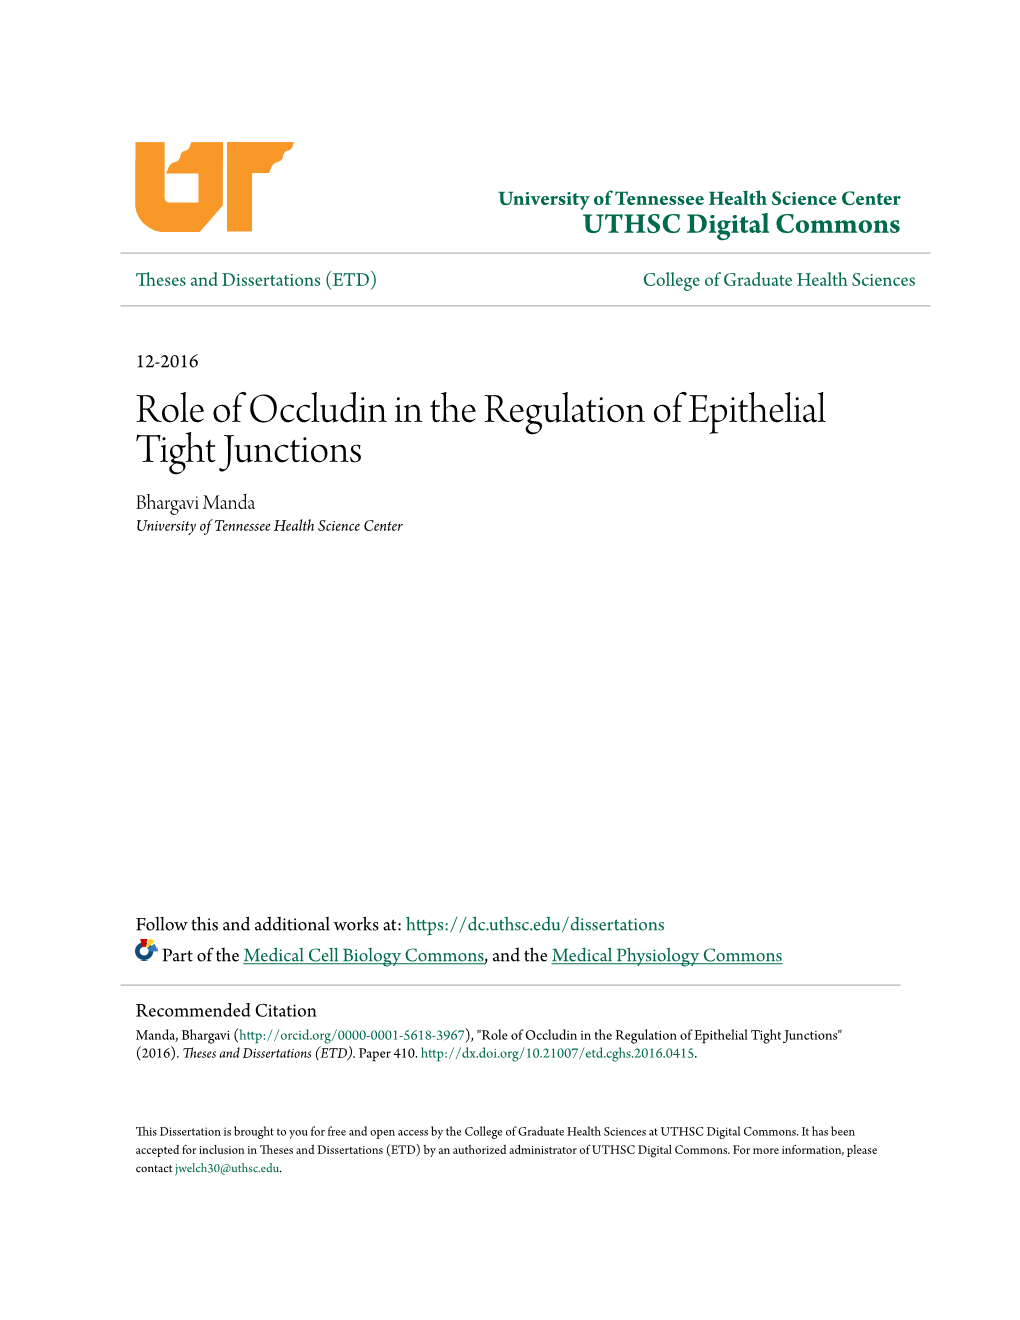 Role of Occludin in the Regulation of Epithelial Tight Junctions Bhargavi Manda University of Tennessee Health Science Center